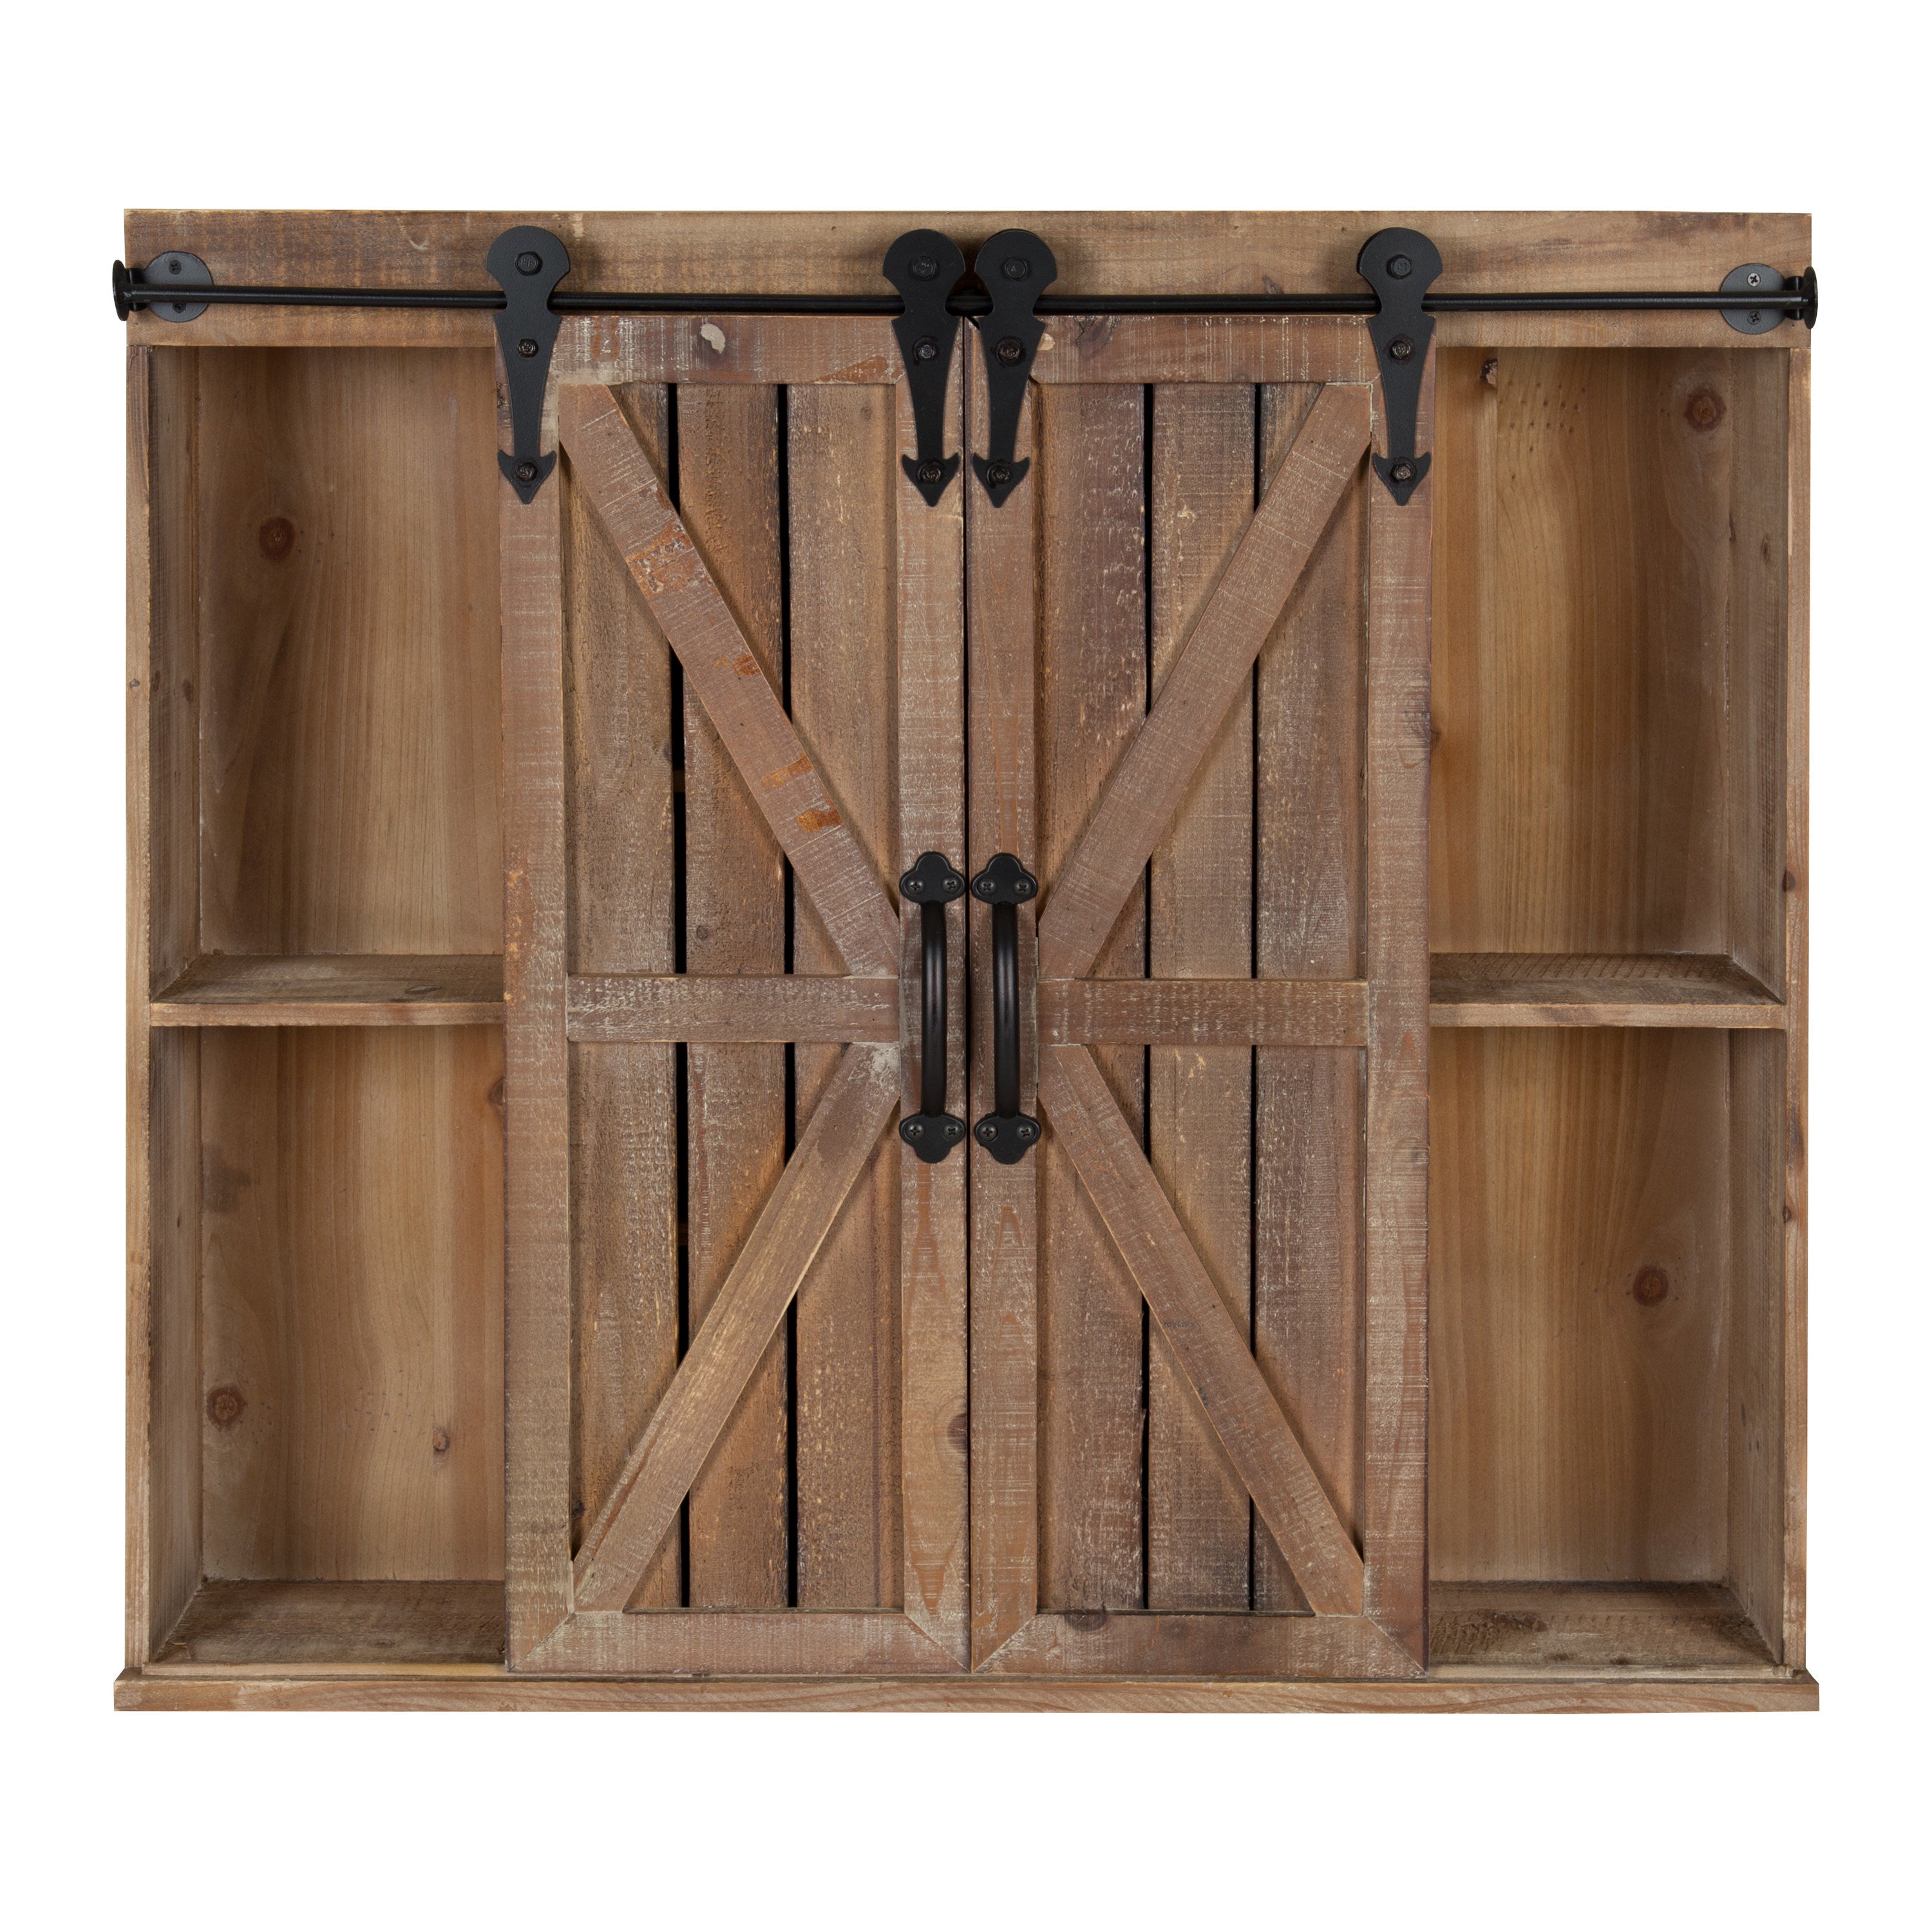 Cates Decorative Wood Wall Storage Cabinet with Sliding Barn Doors